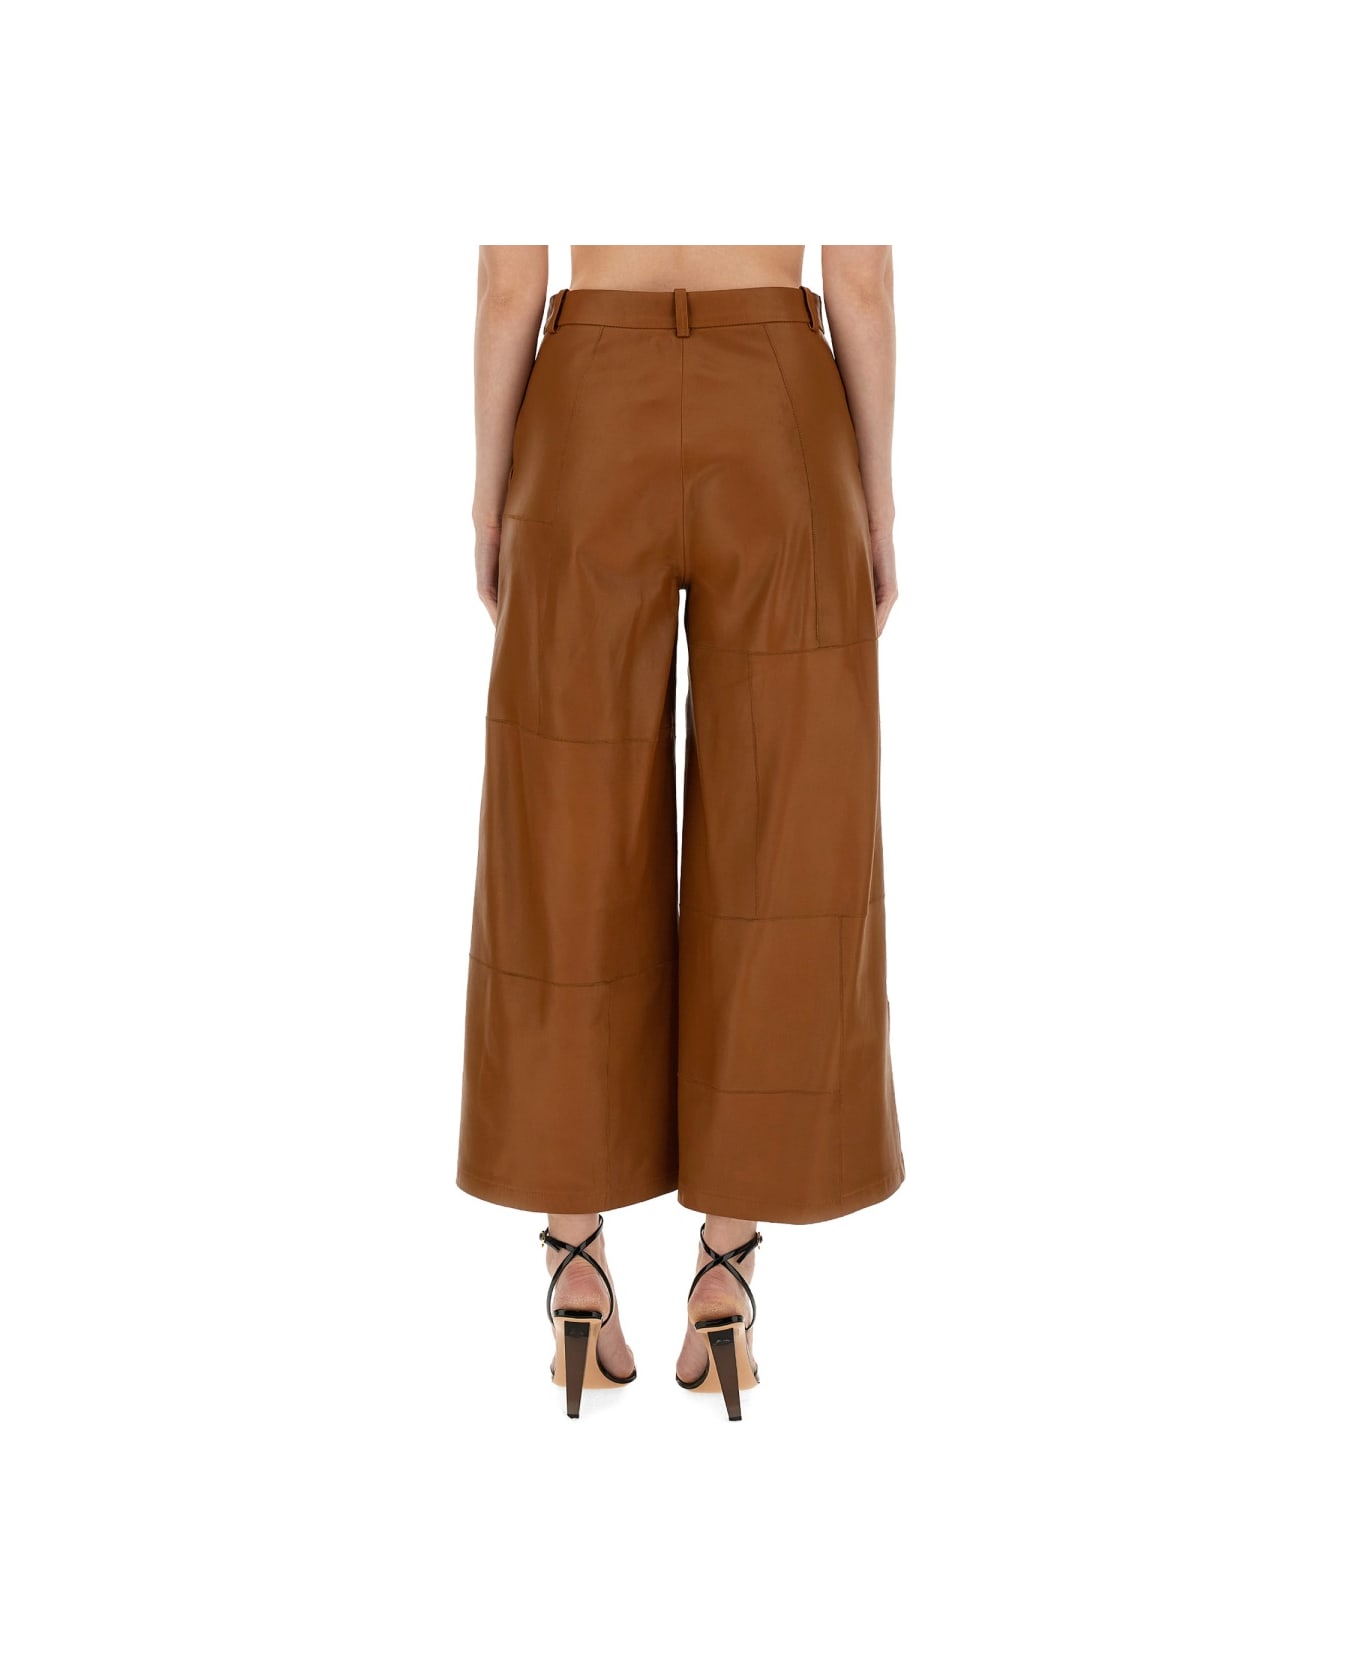 Alysi Patch Pants - Leather Brown